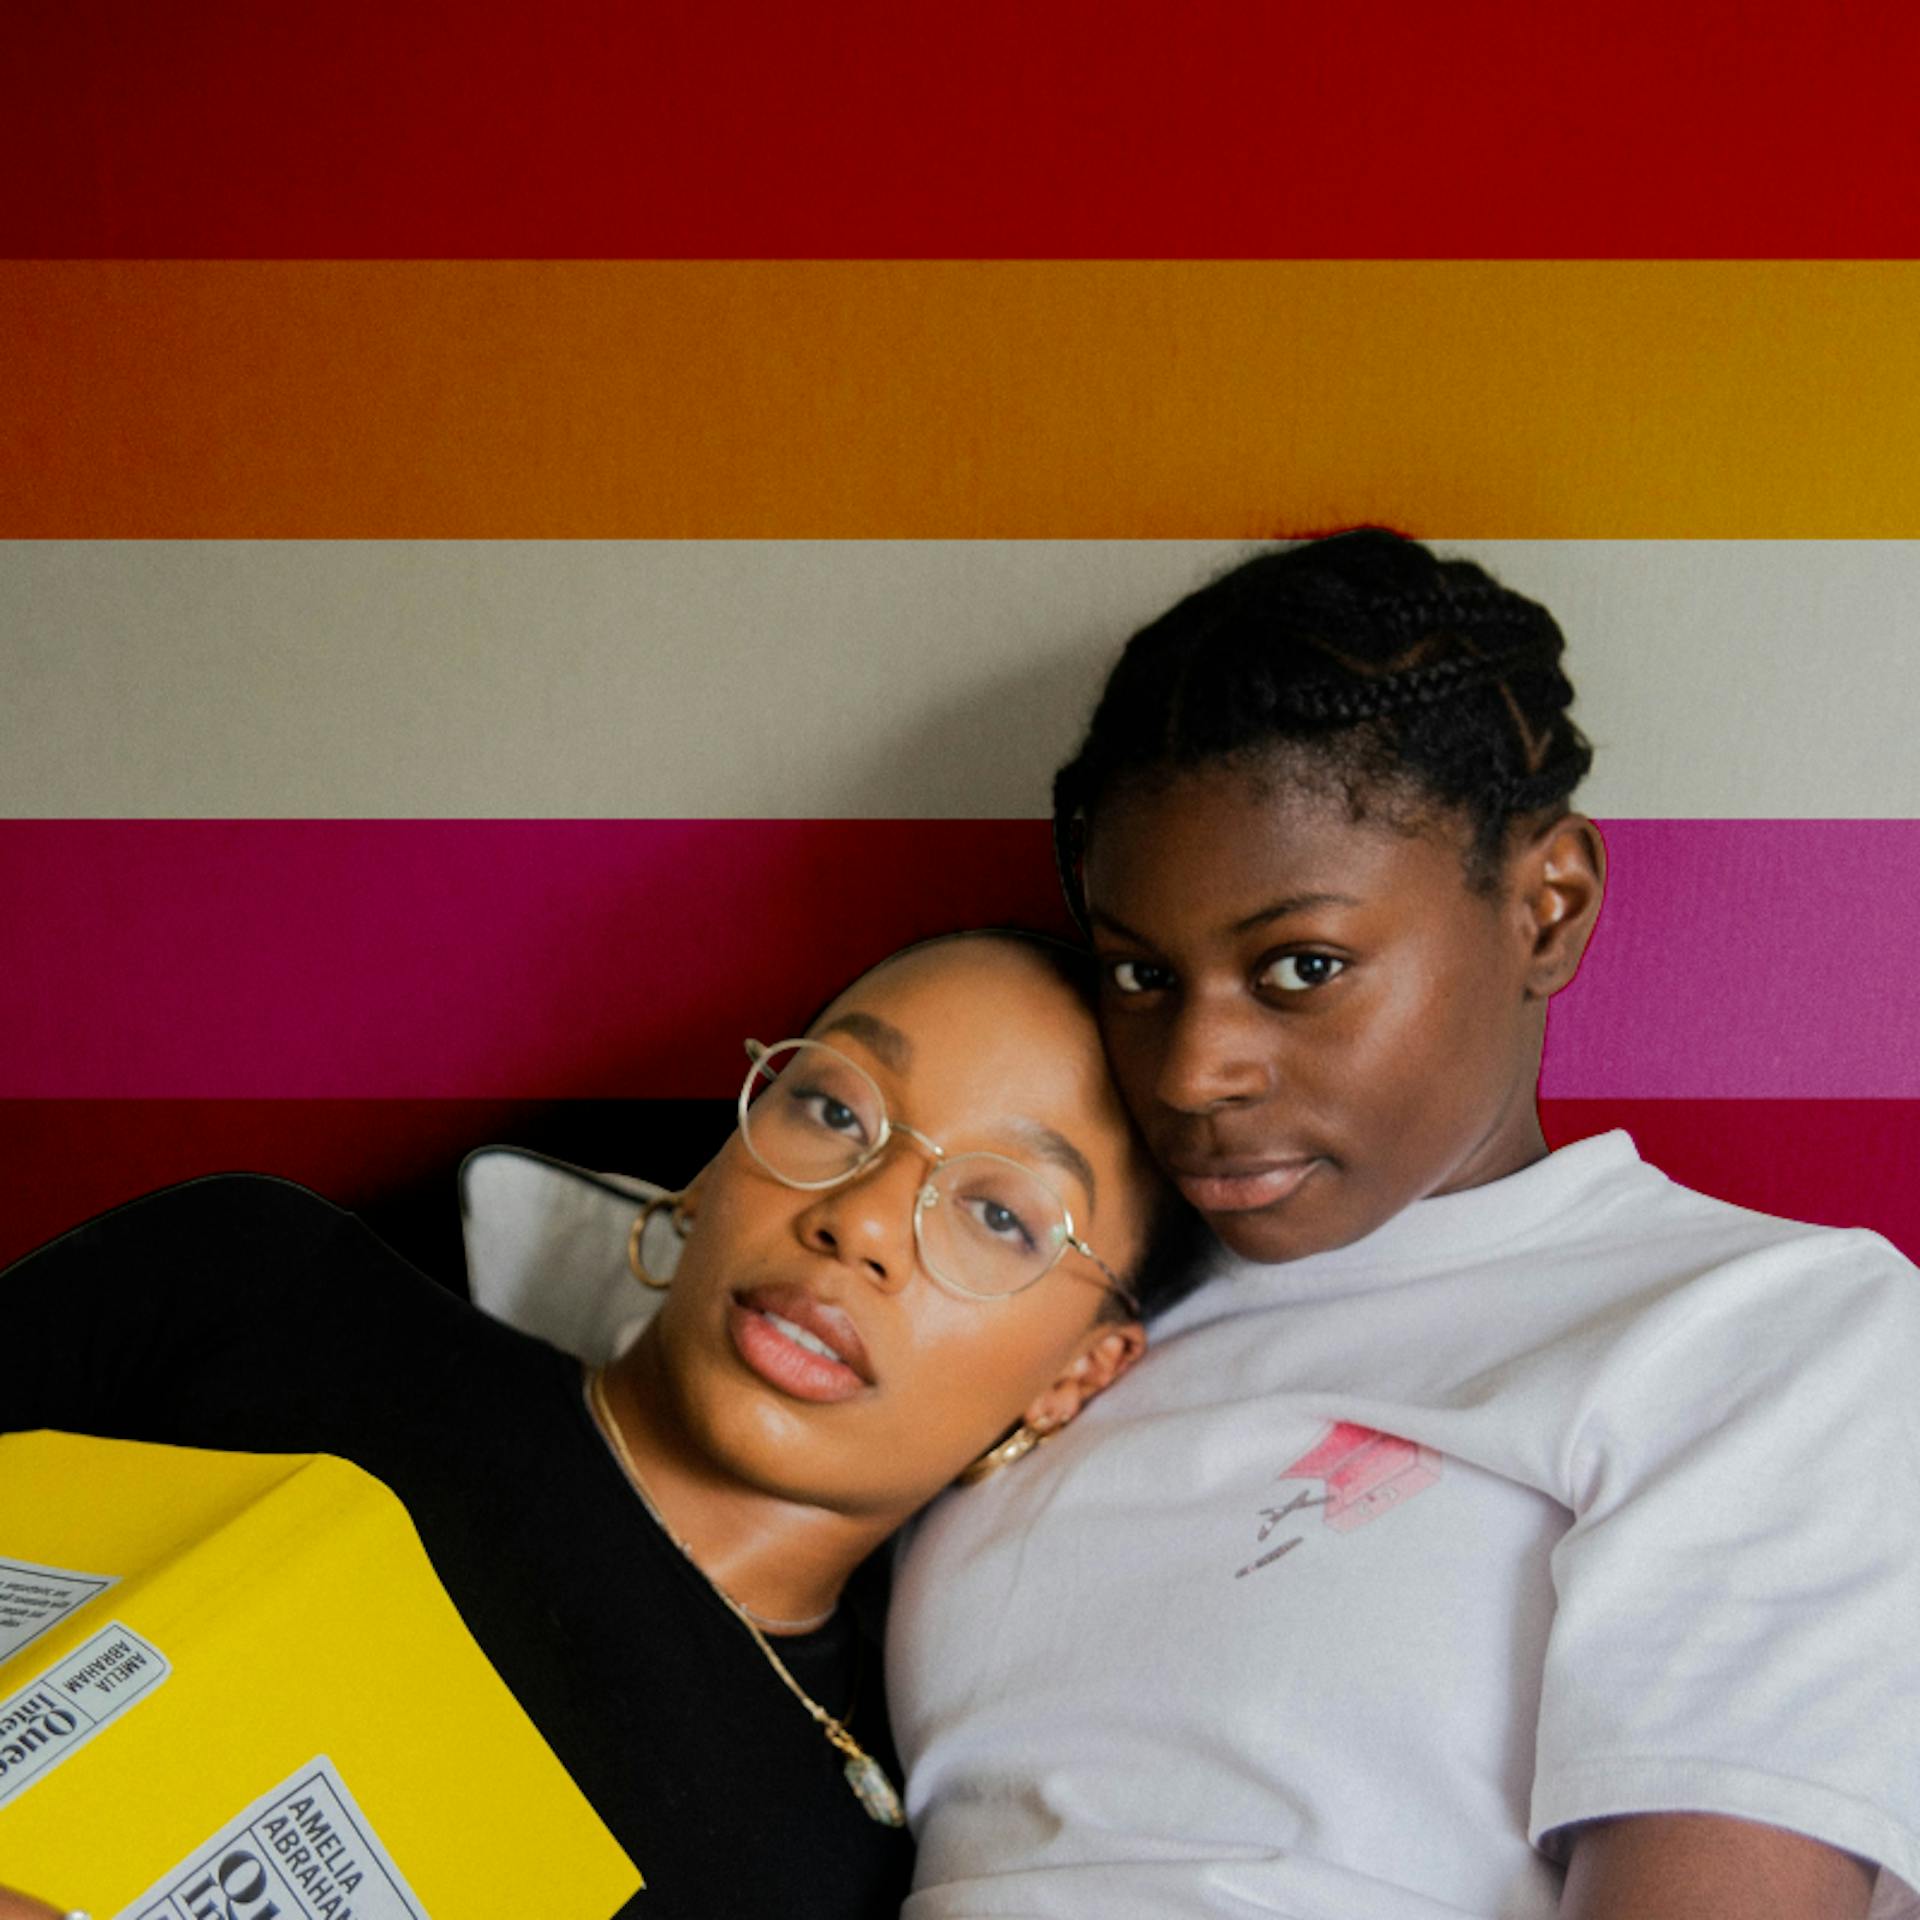 A lesbian couple in front of the lesbian pride flag.